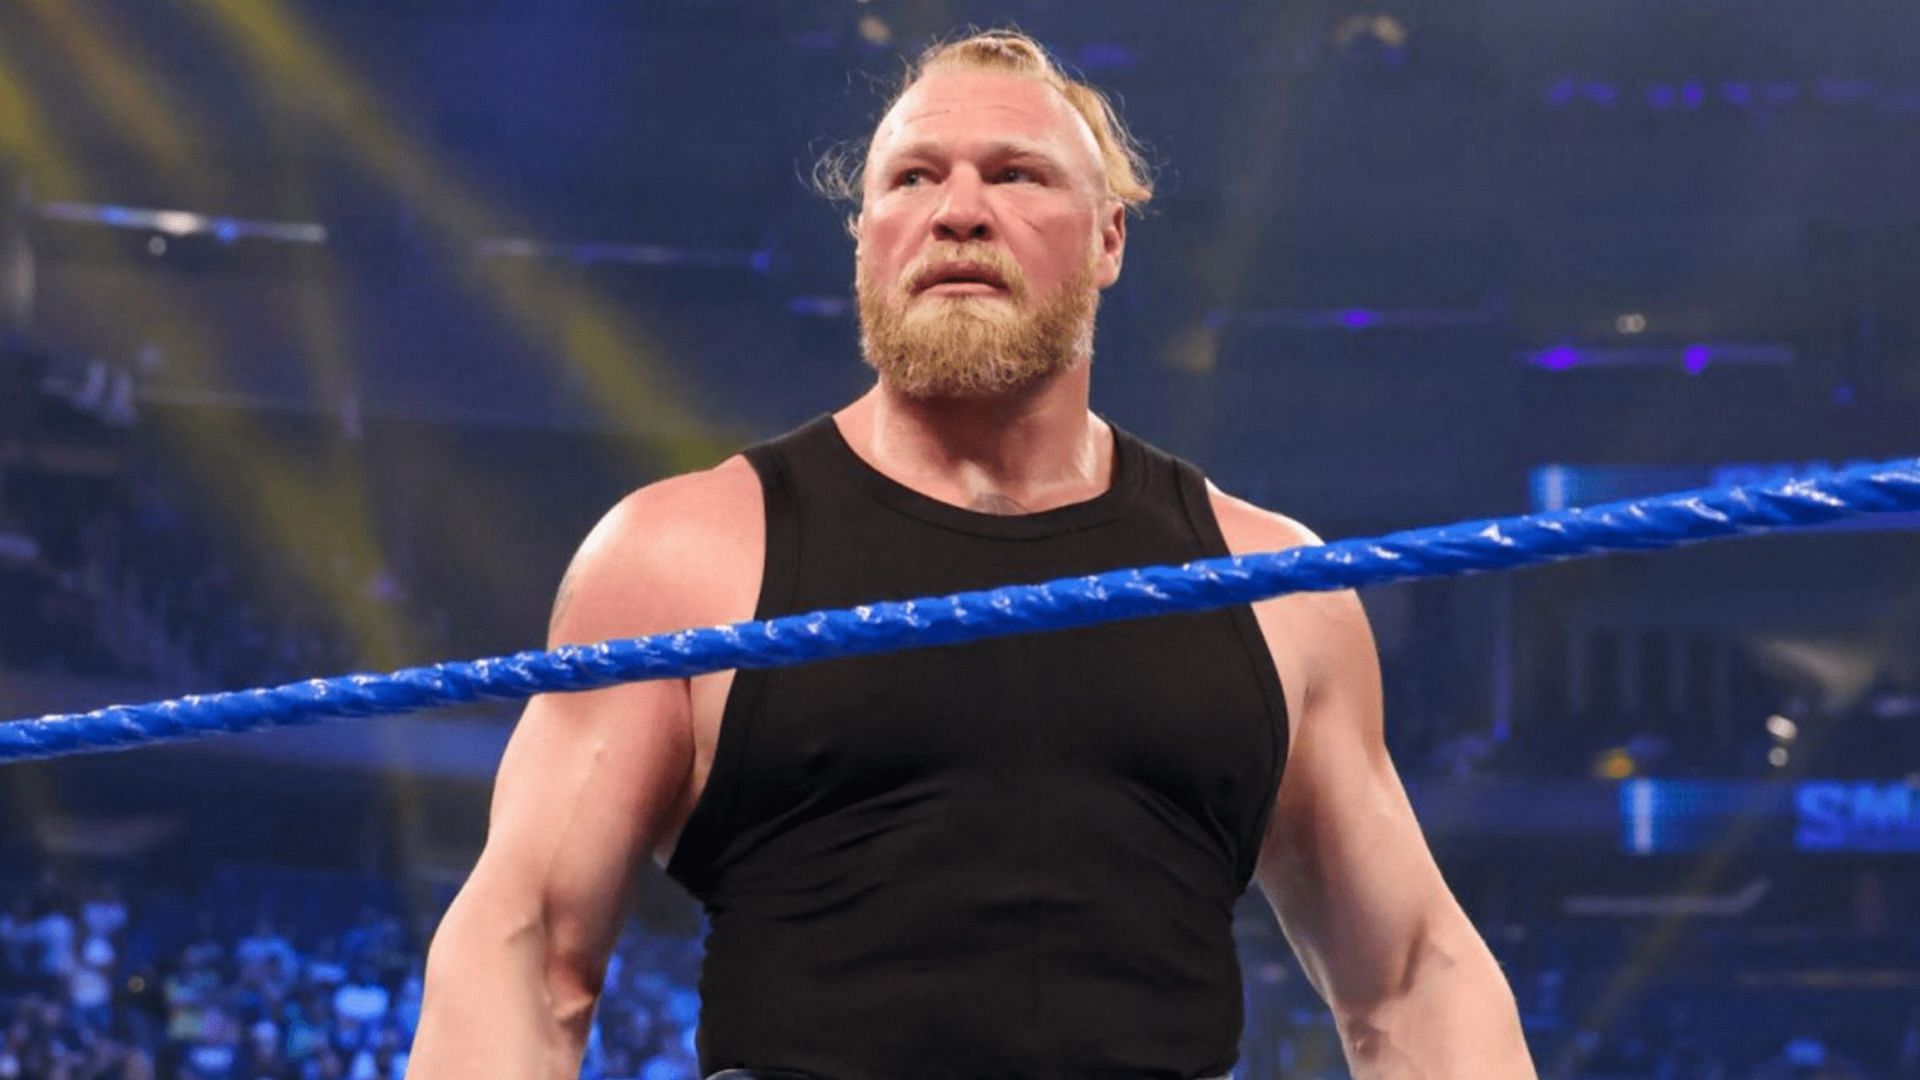 Brock Lesnar was diagnosed with diverticulitis in 2009